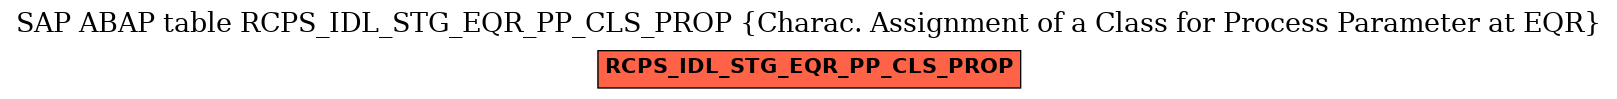 E-R Diagram for table RCPS_IDL_STG_EQR_PP_CLS_PROP (Charac. Assignment of a Class for Process Parameter at EQR)